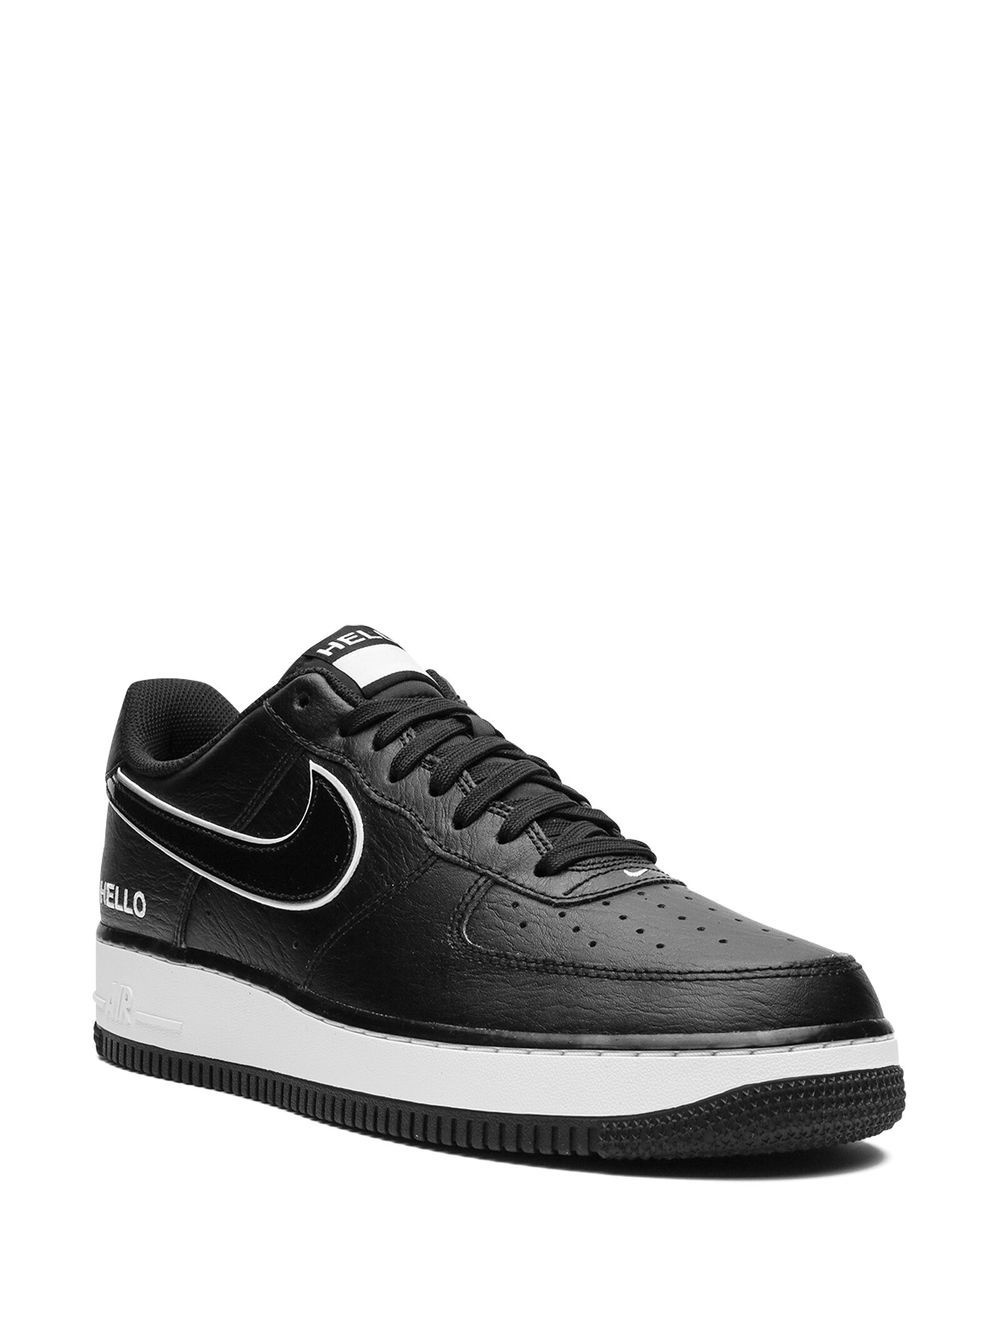 Air Force 1 '07 LX "Hello" sneakers - 2